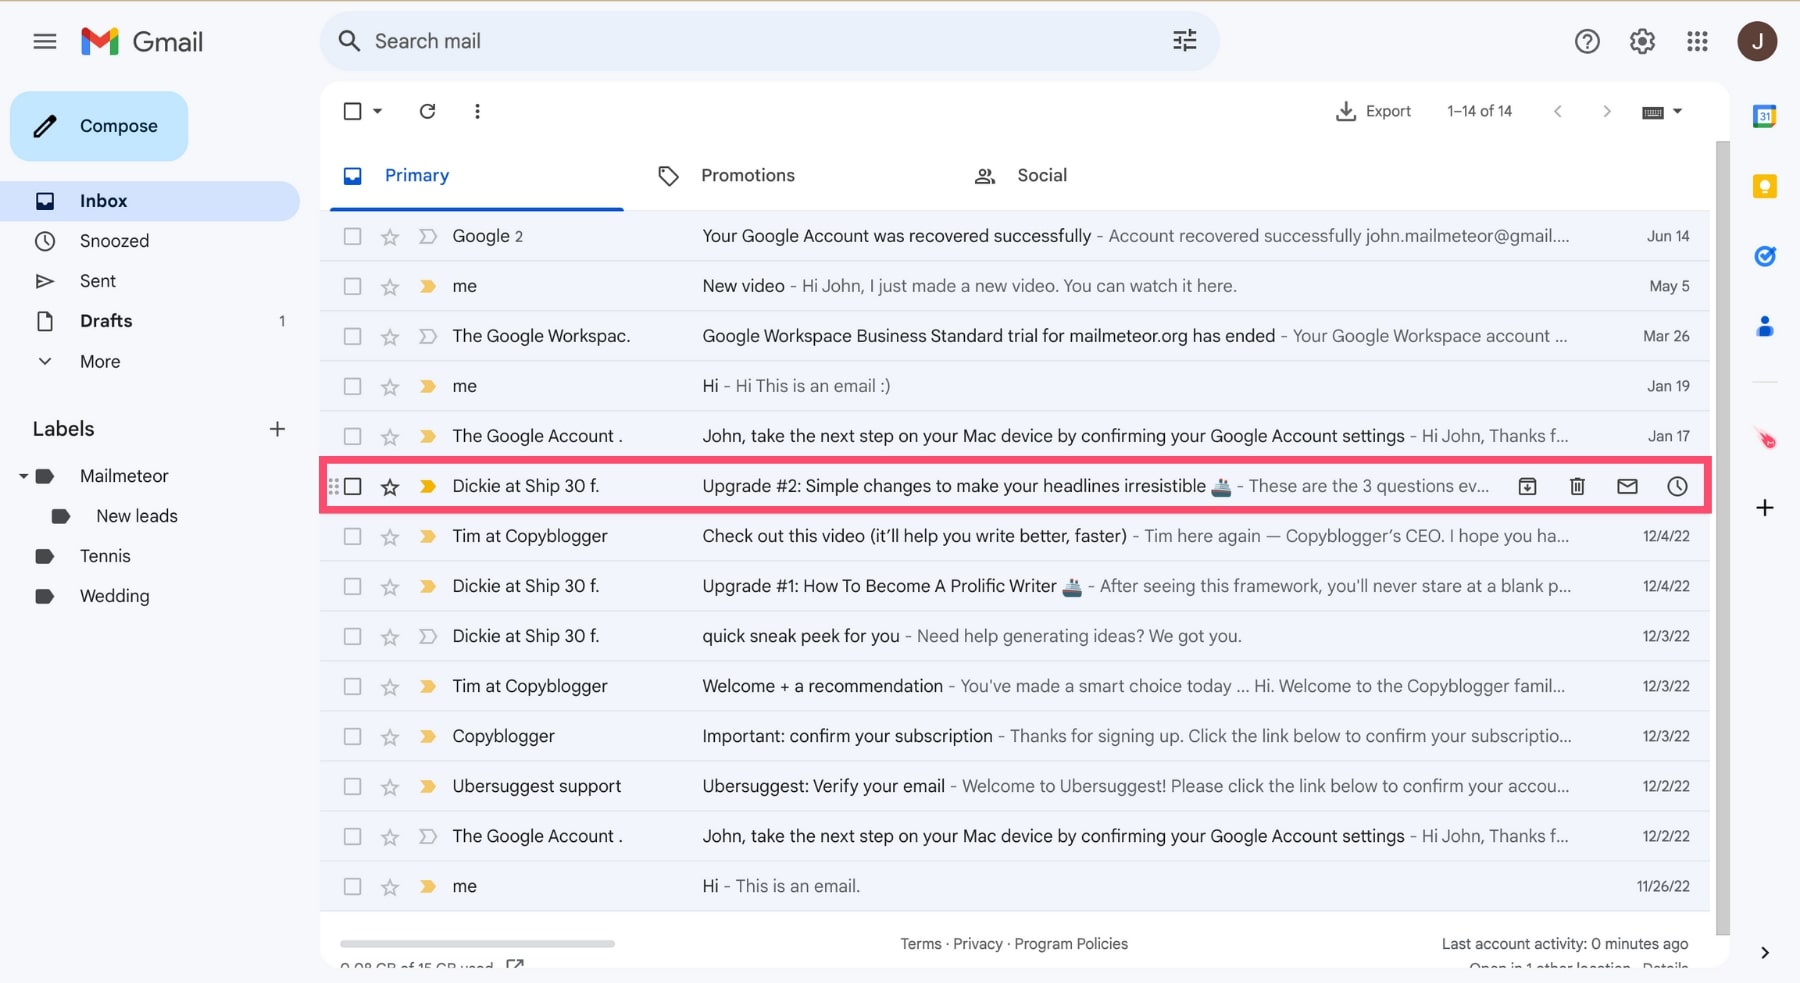 How to find an email in Gmail